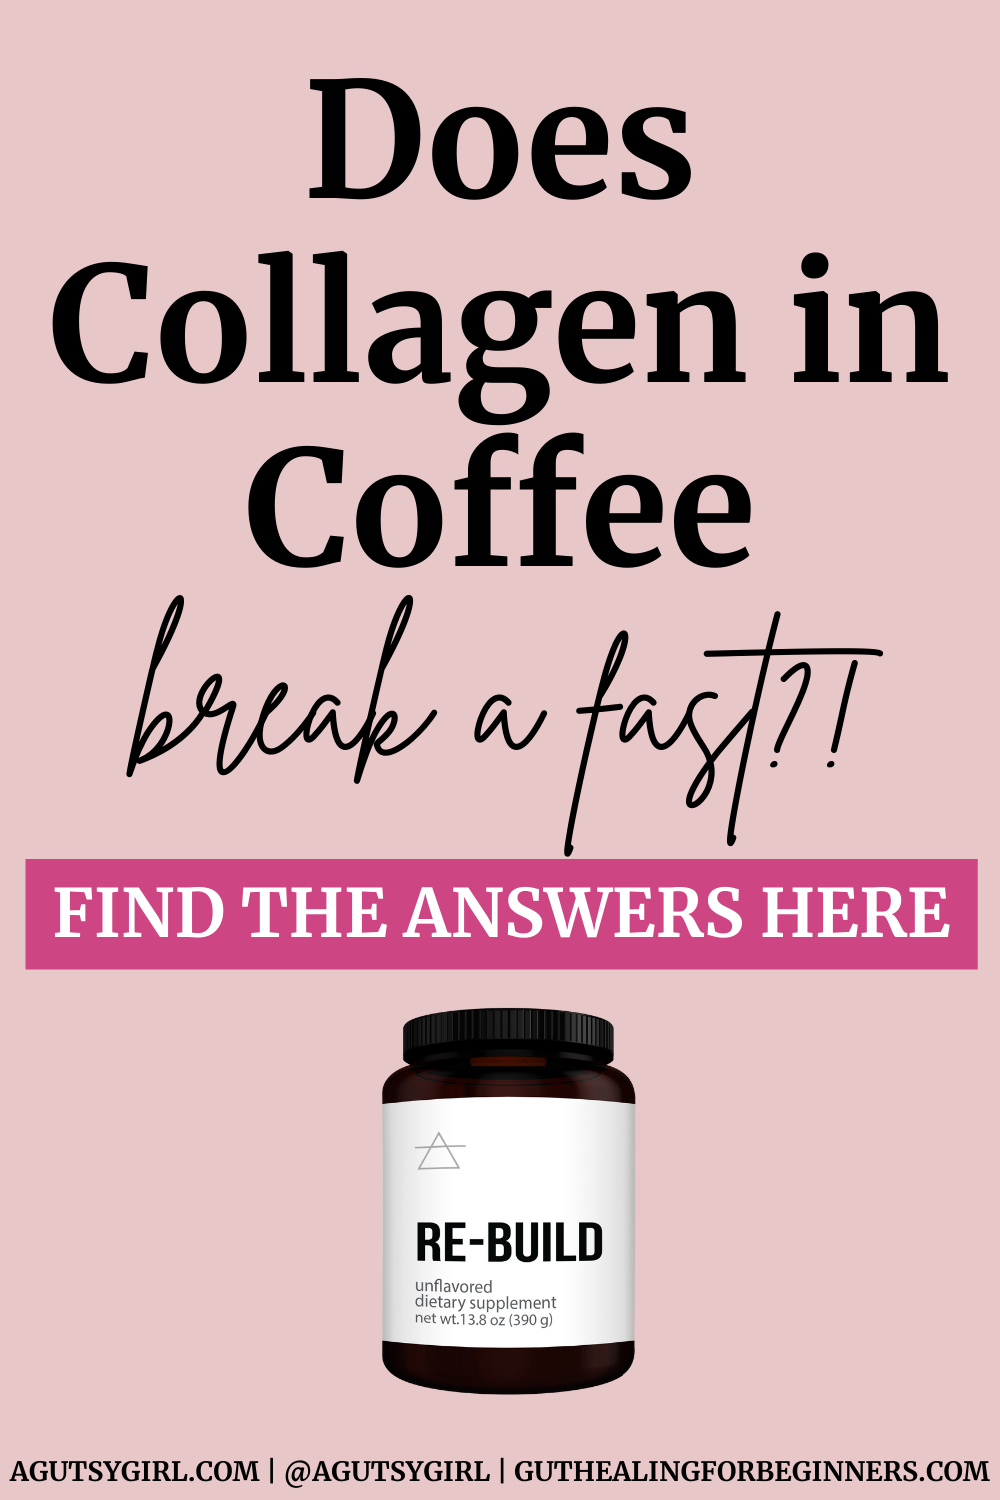 Do Collagen Peptides Break a Fast? Find Out the Truth!